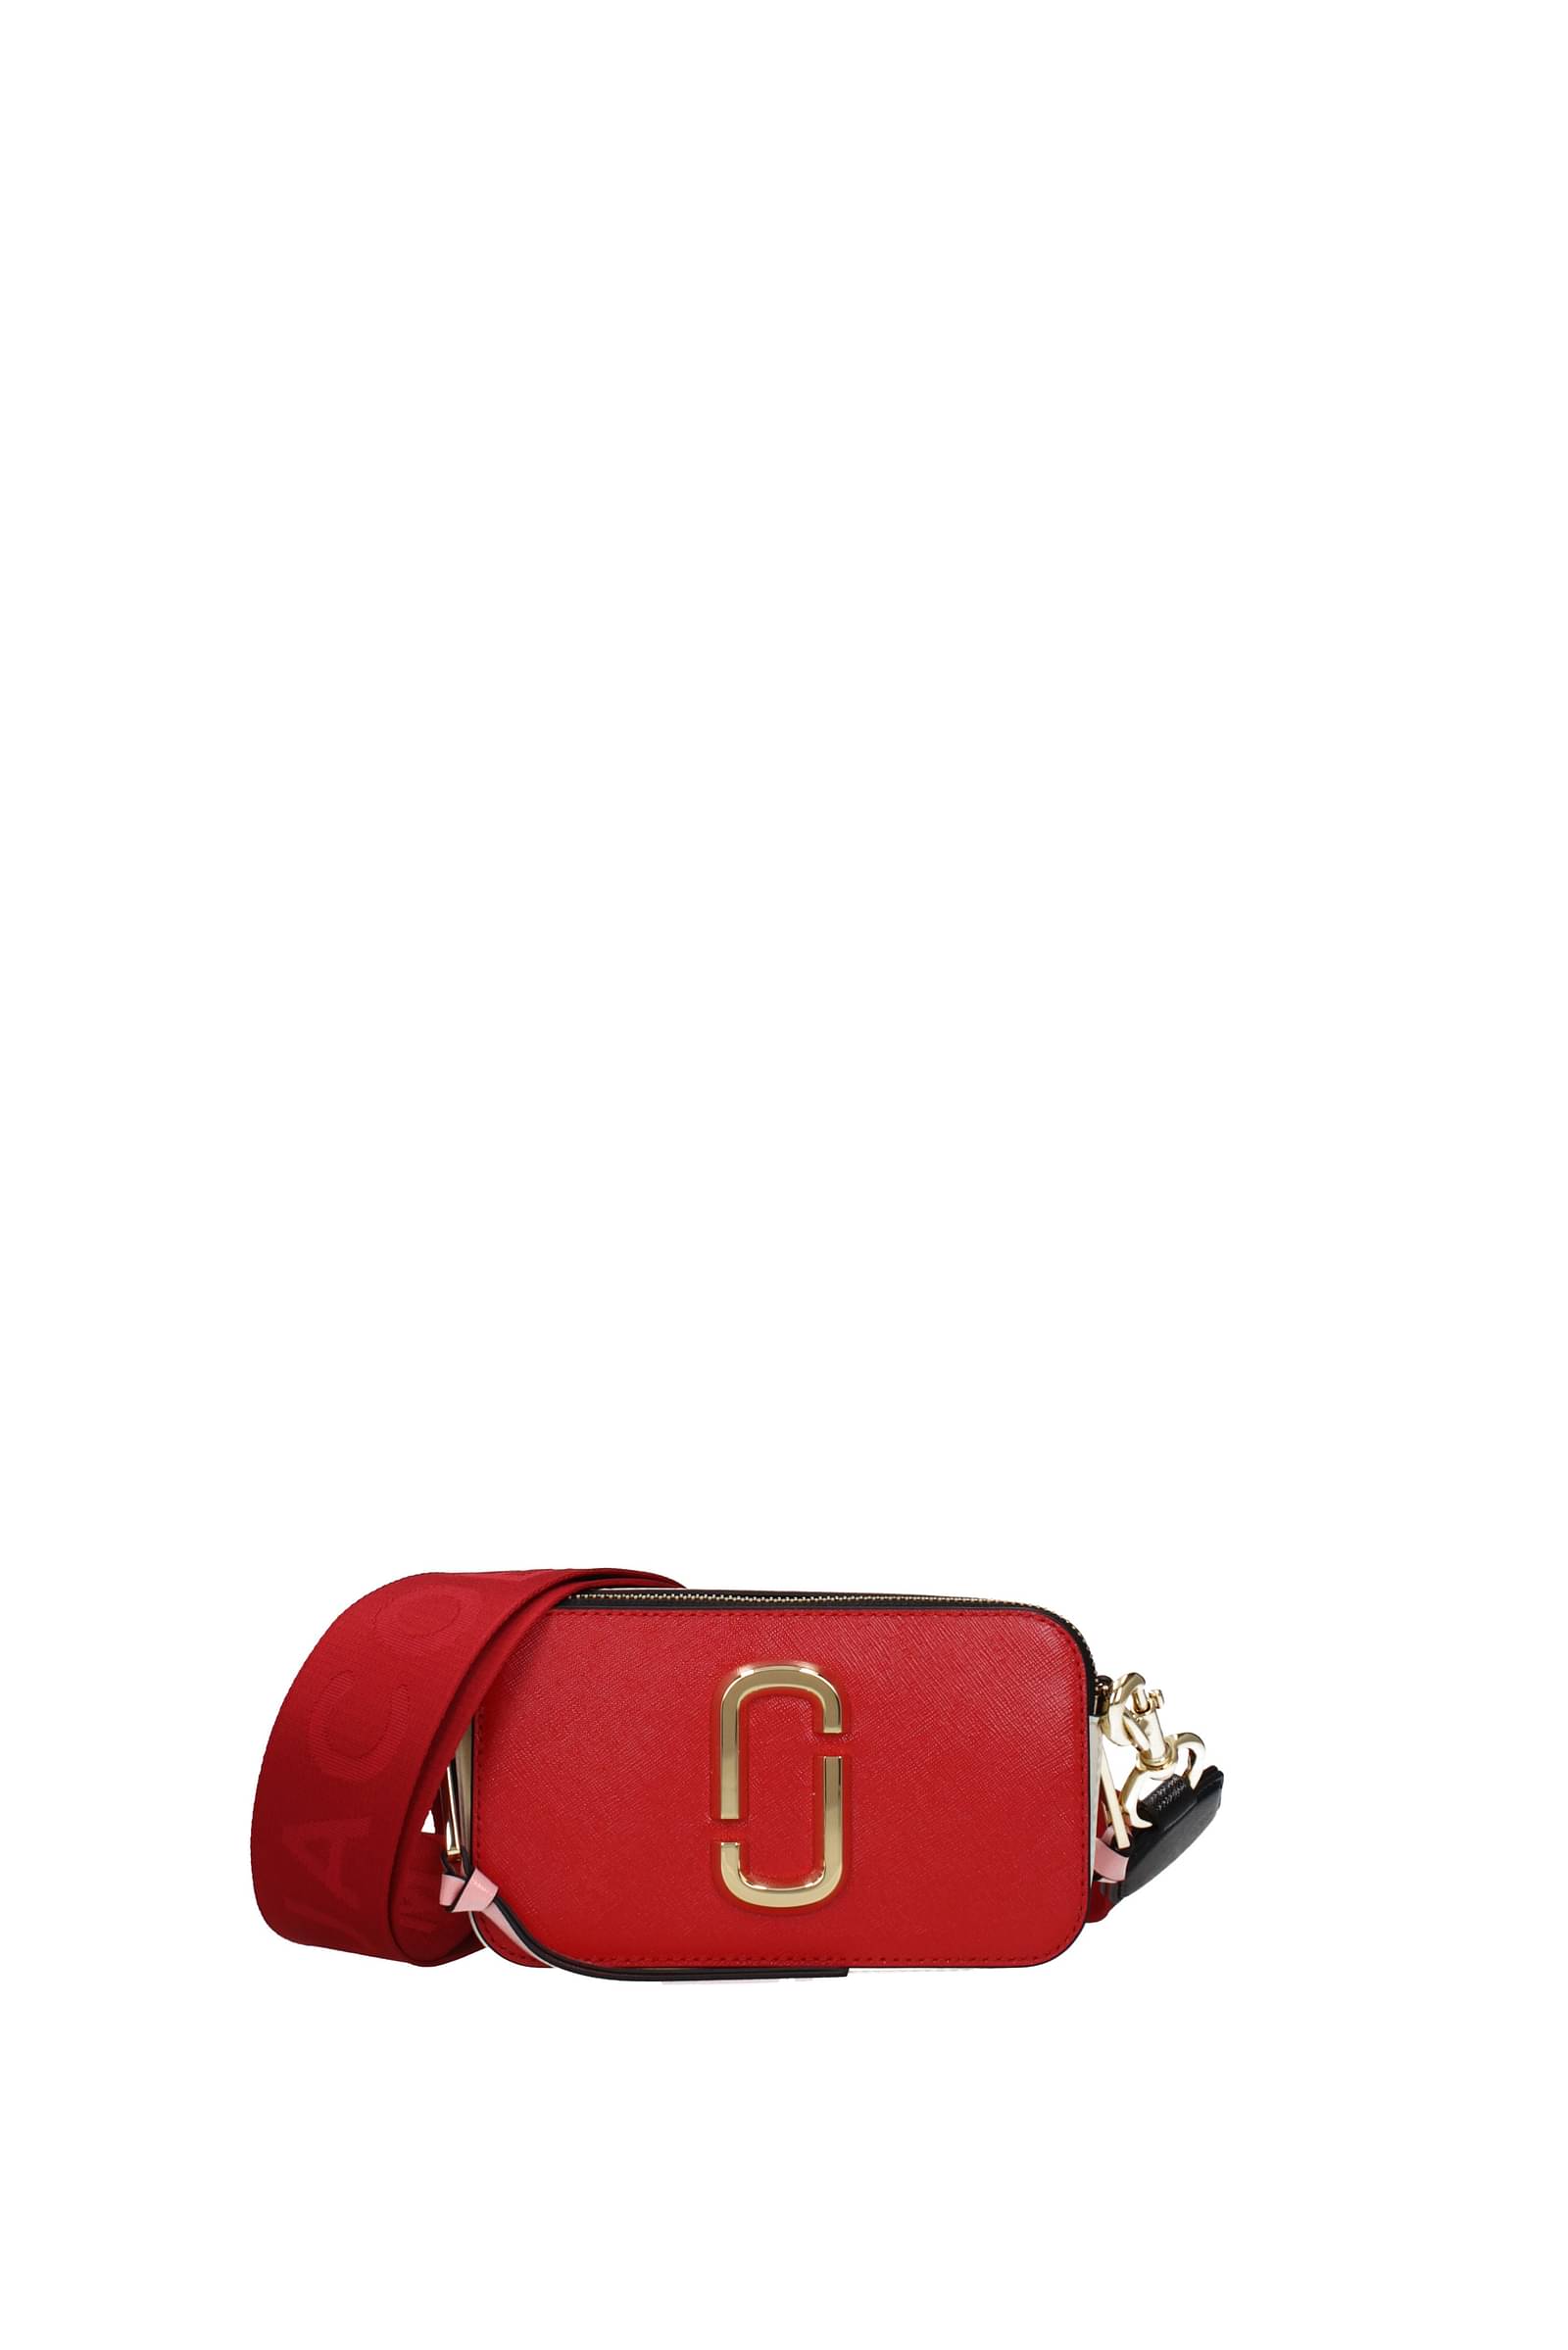 marc jacobs-borse a tracolla snapshot pelle rosso true red-donna